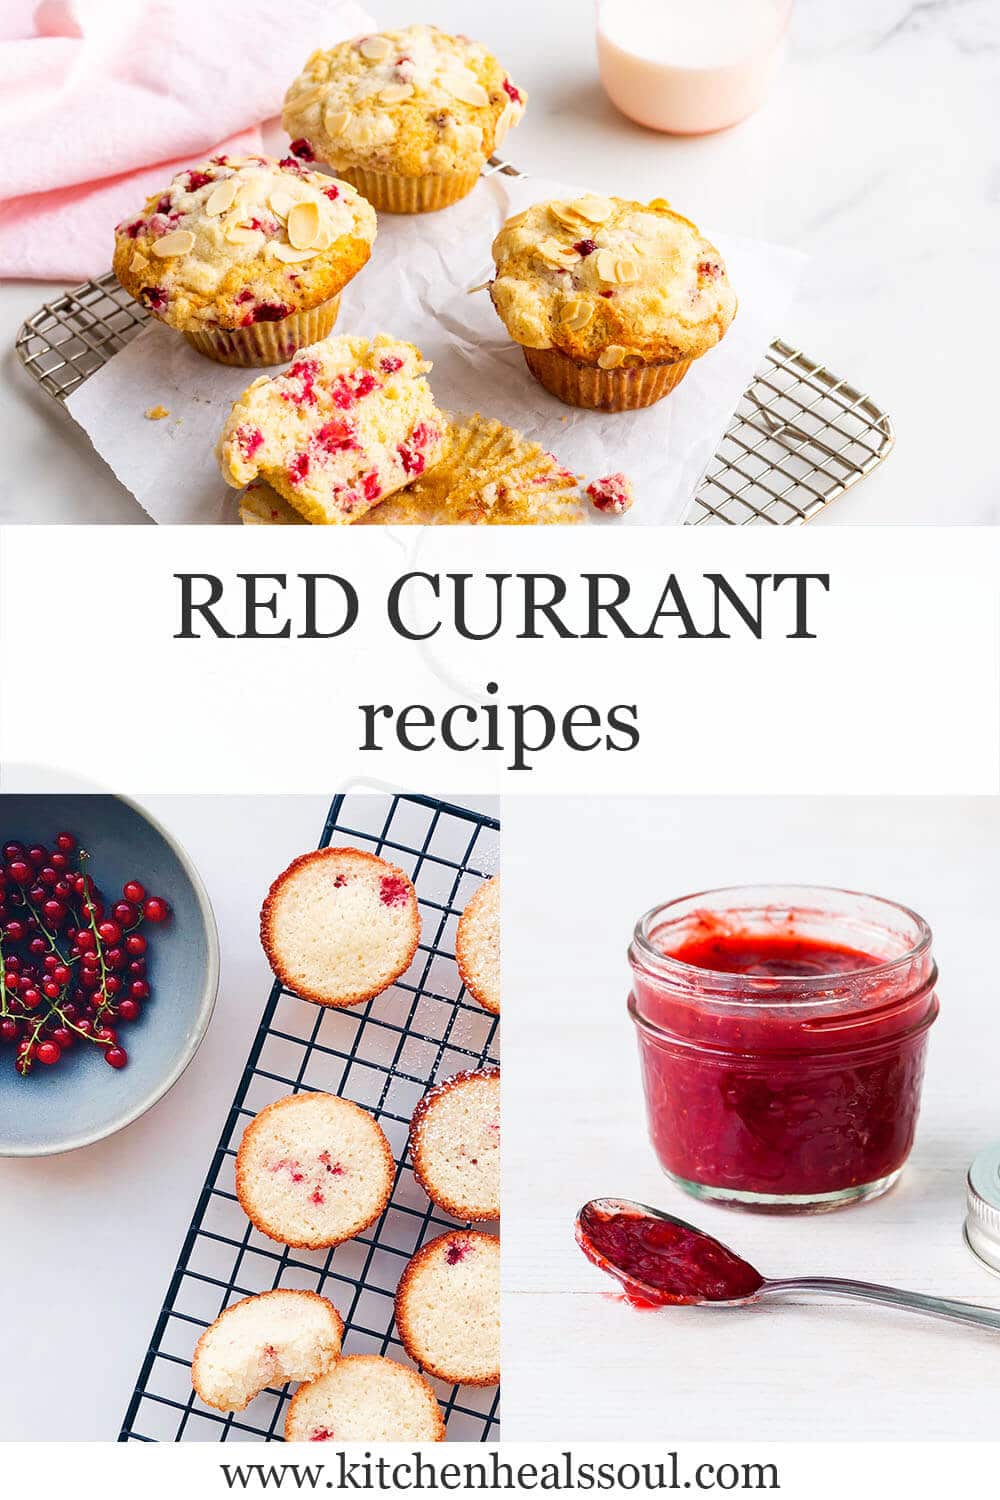 What to bake with fresh currants